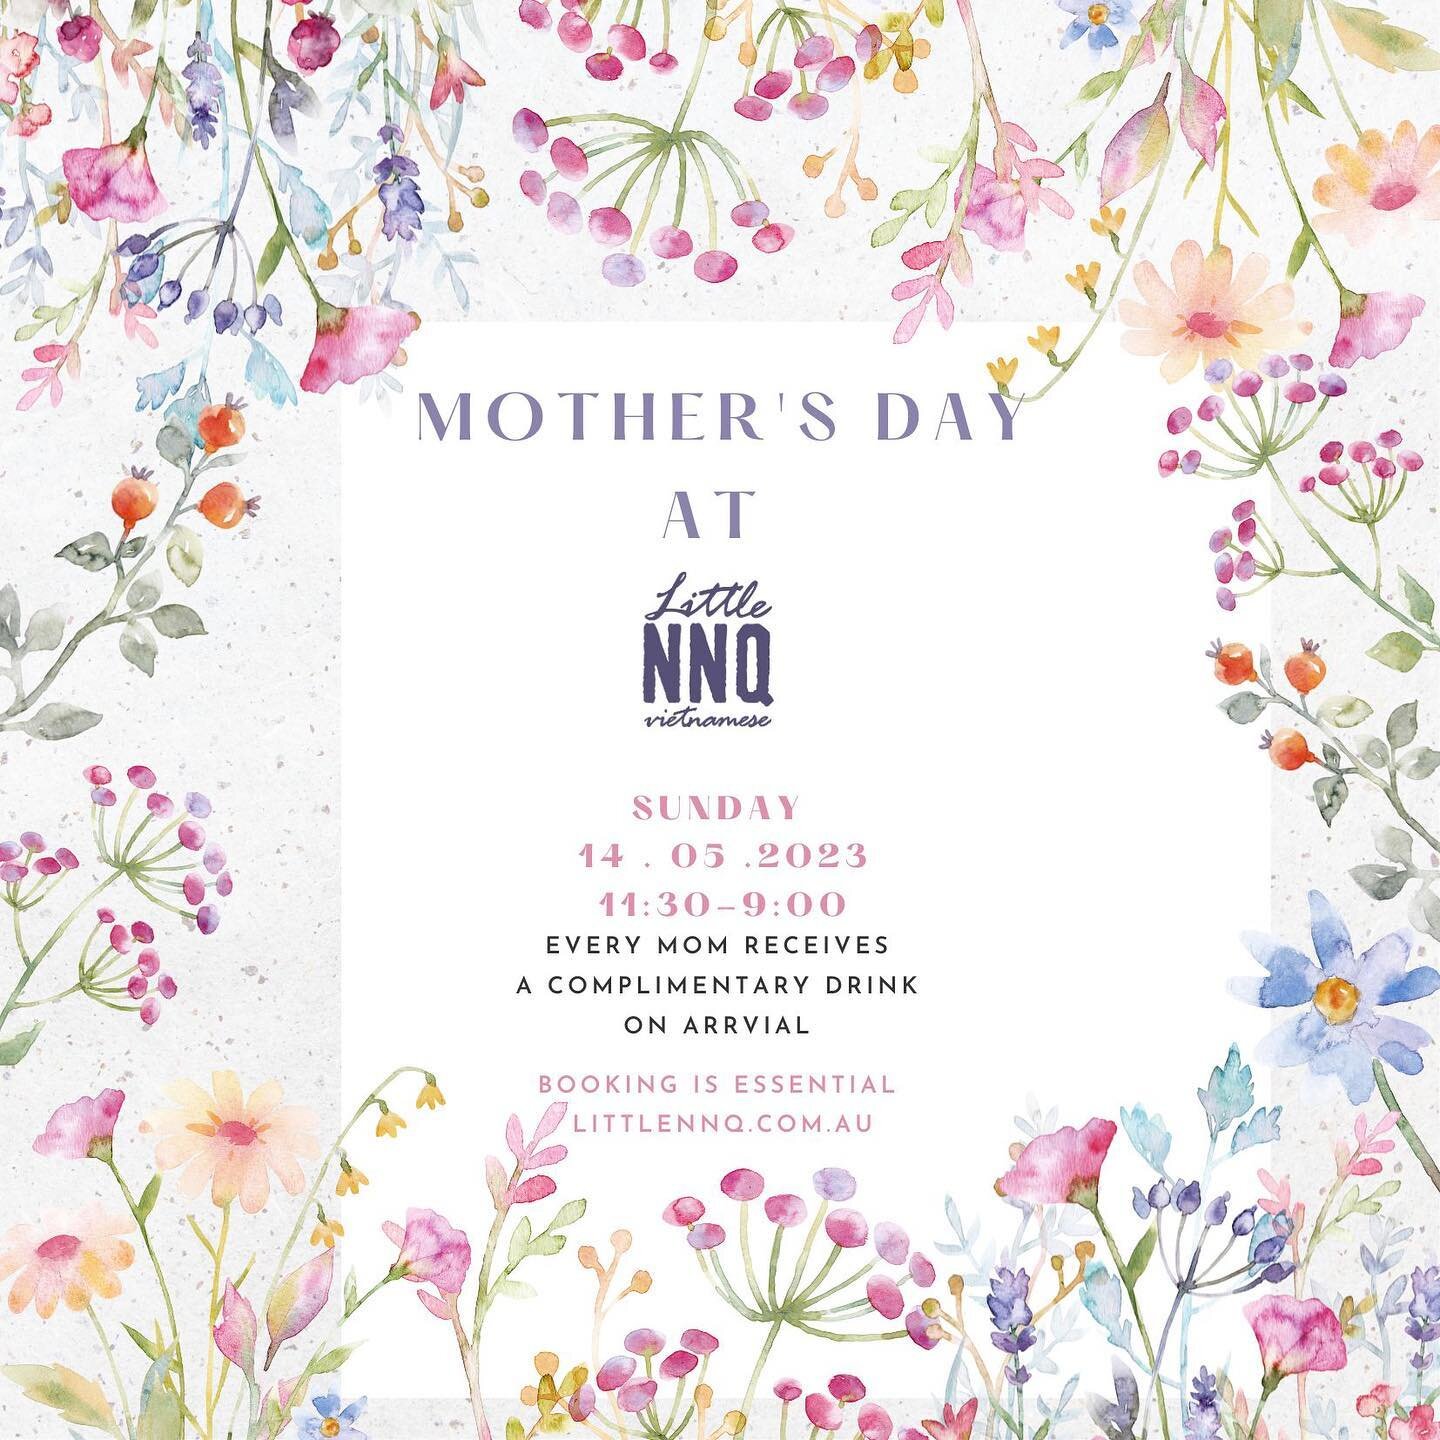 &bull; MOTHER's DAY &bull;

Treat your mum with her favorite Vietnamese feast and drinks. 

Booking is essential